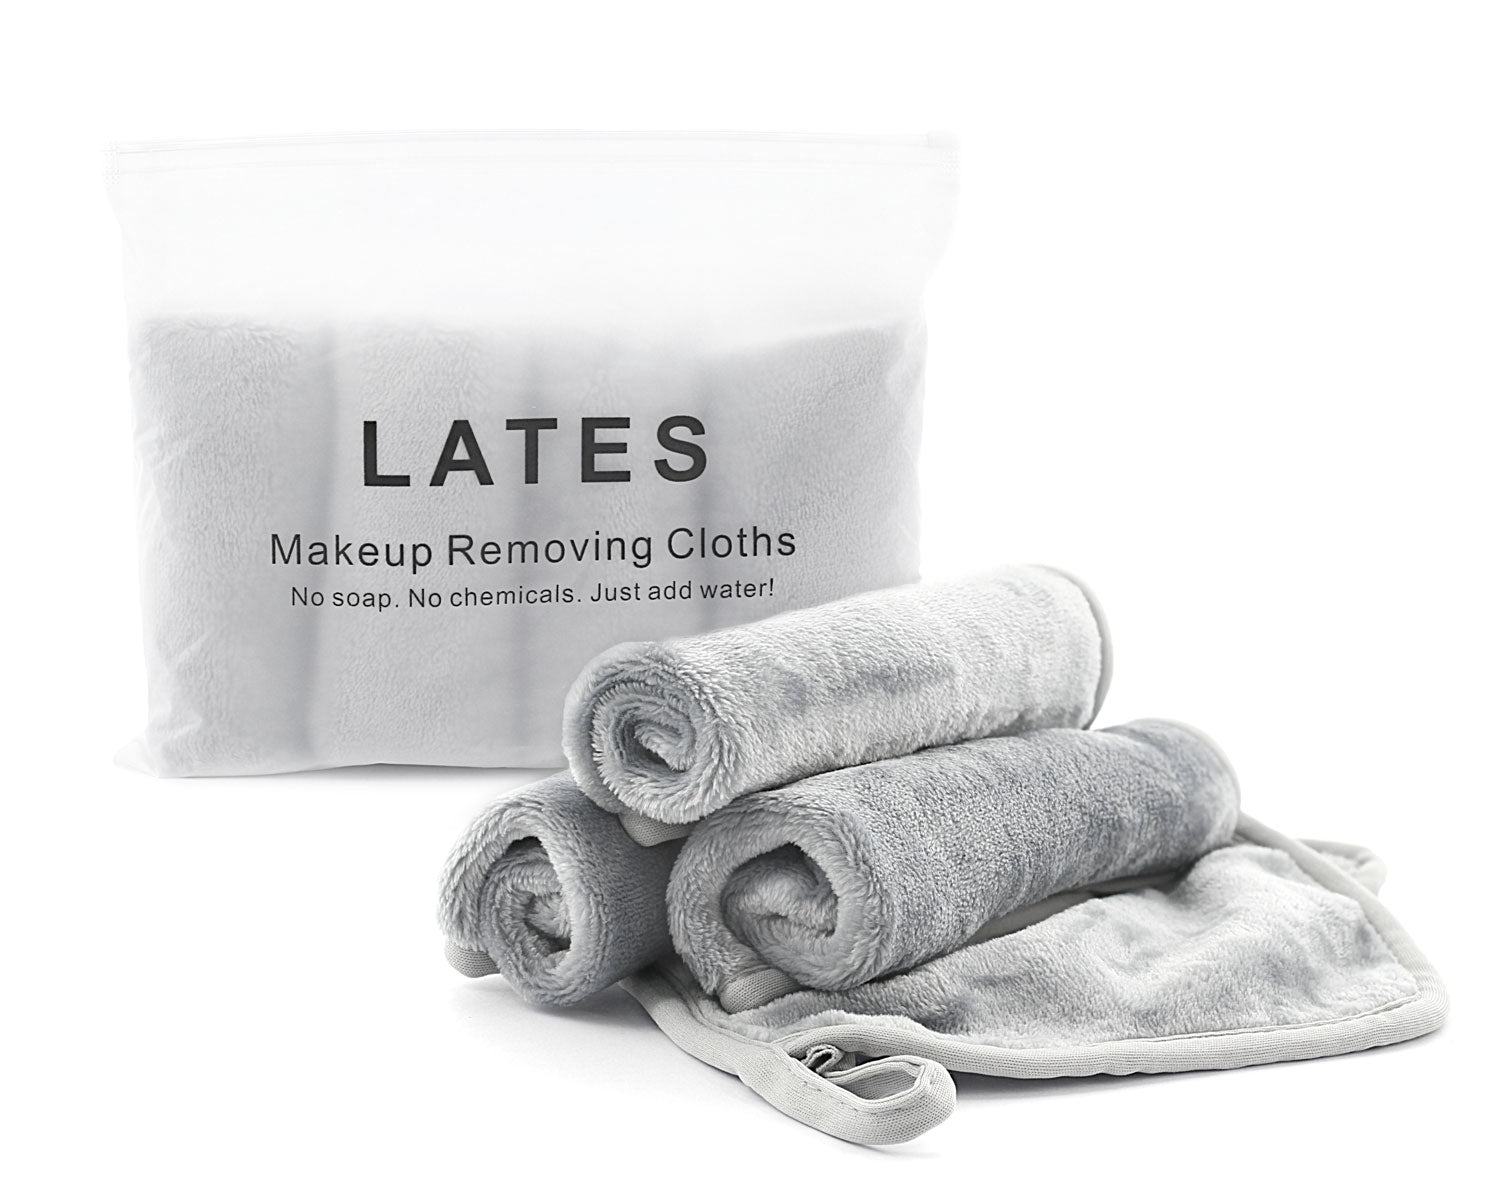 honning forbi Koncession Reusable Make-up Removing Cloths – Lates By Kate